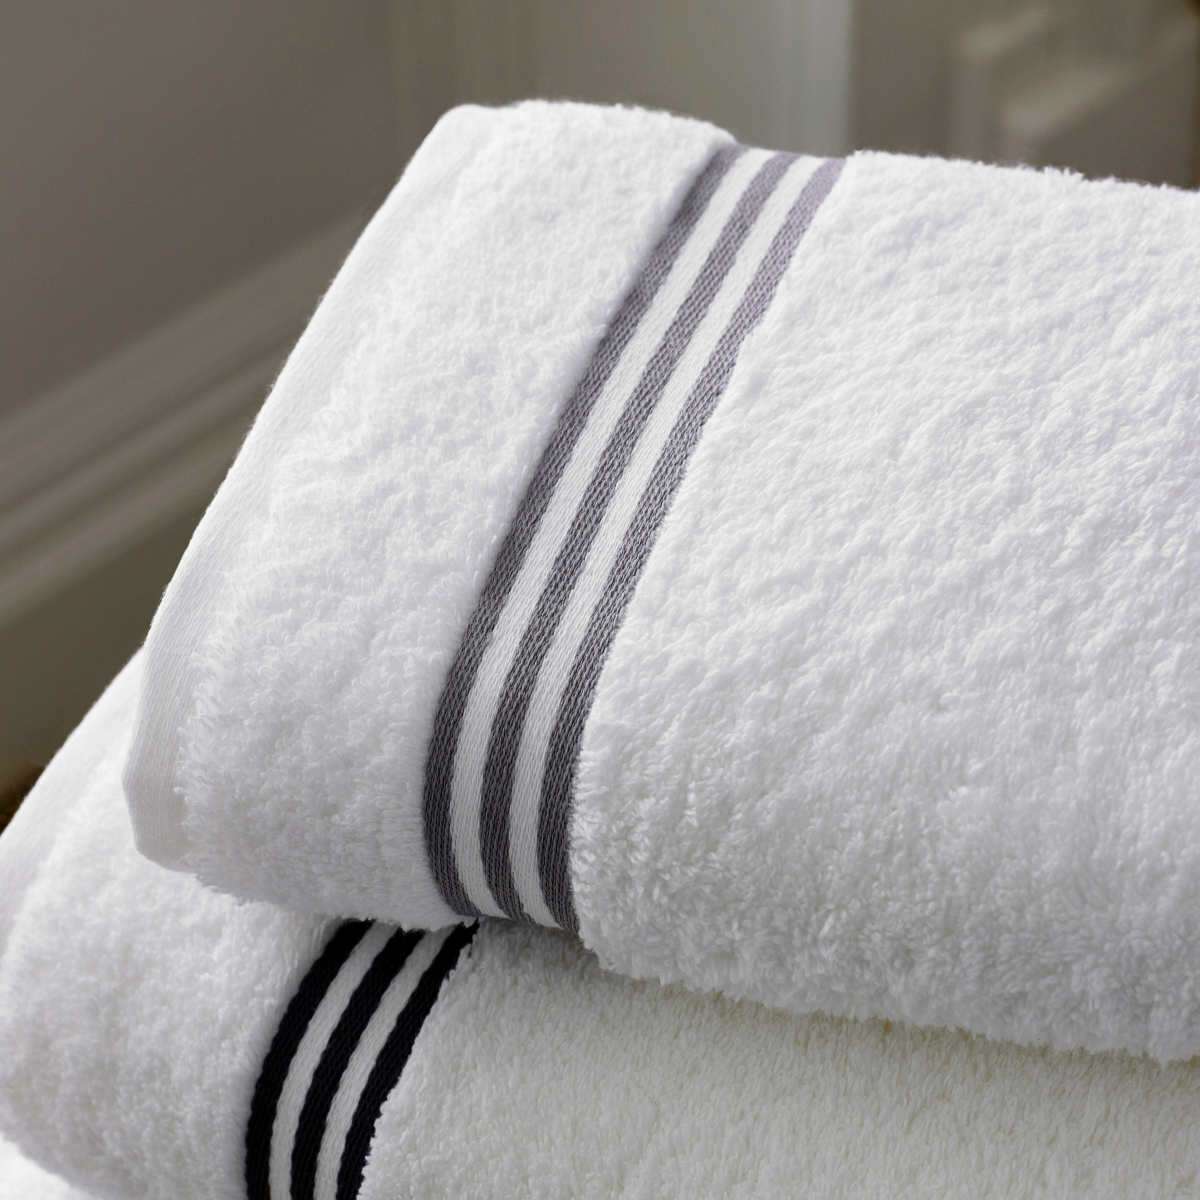 Bathroom bath towels | How To Fold Towels | Step by Step Guide